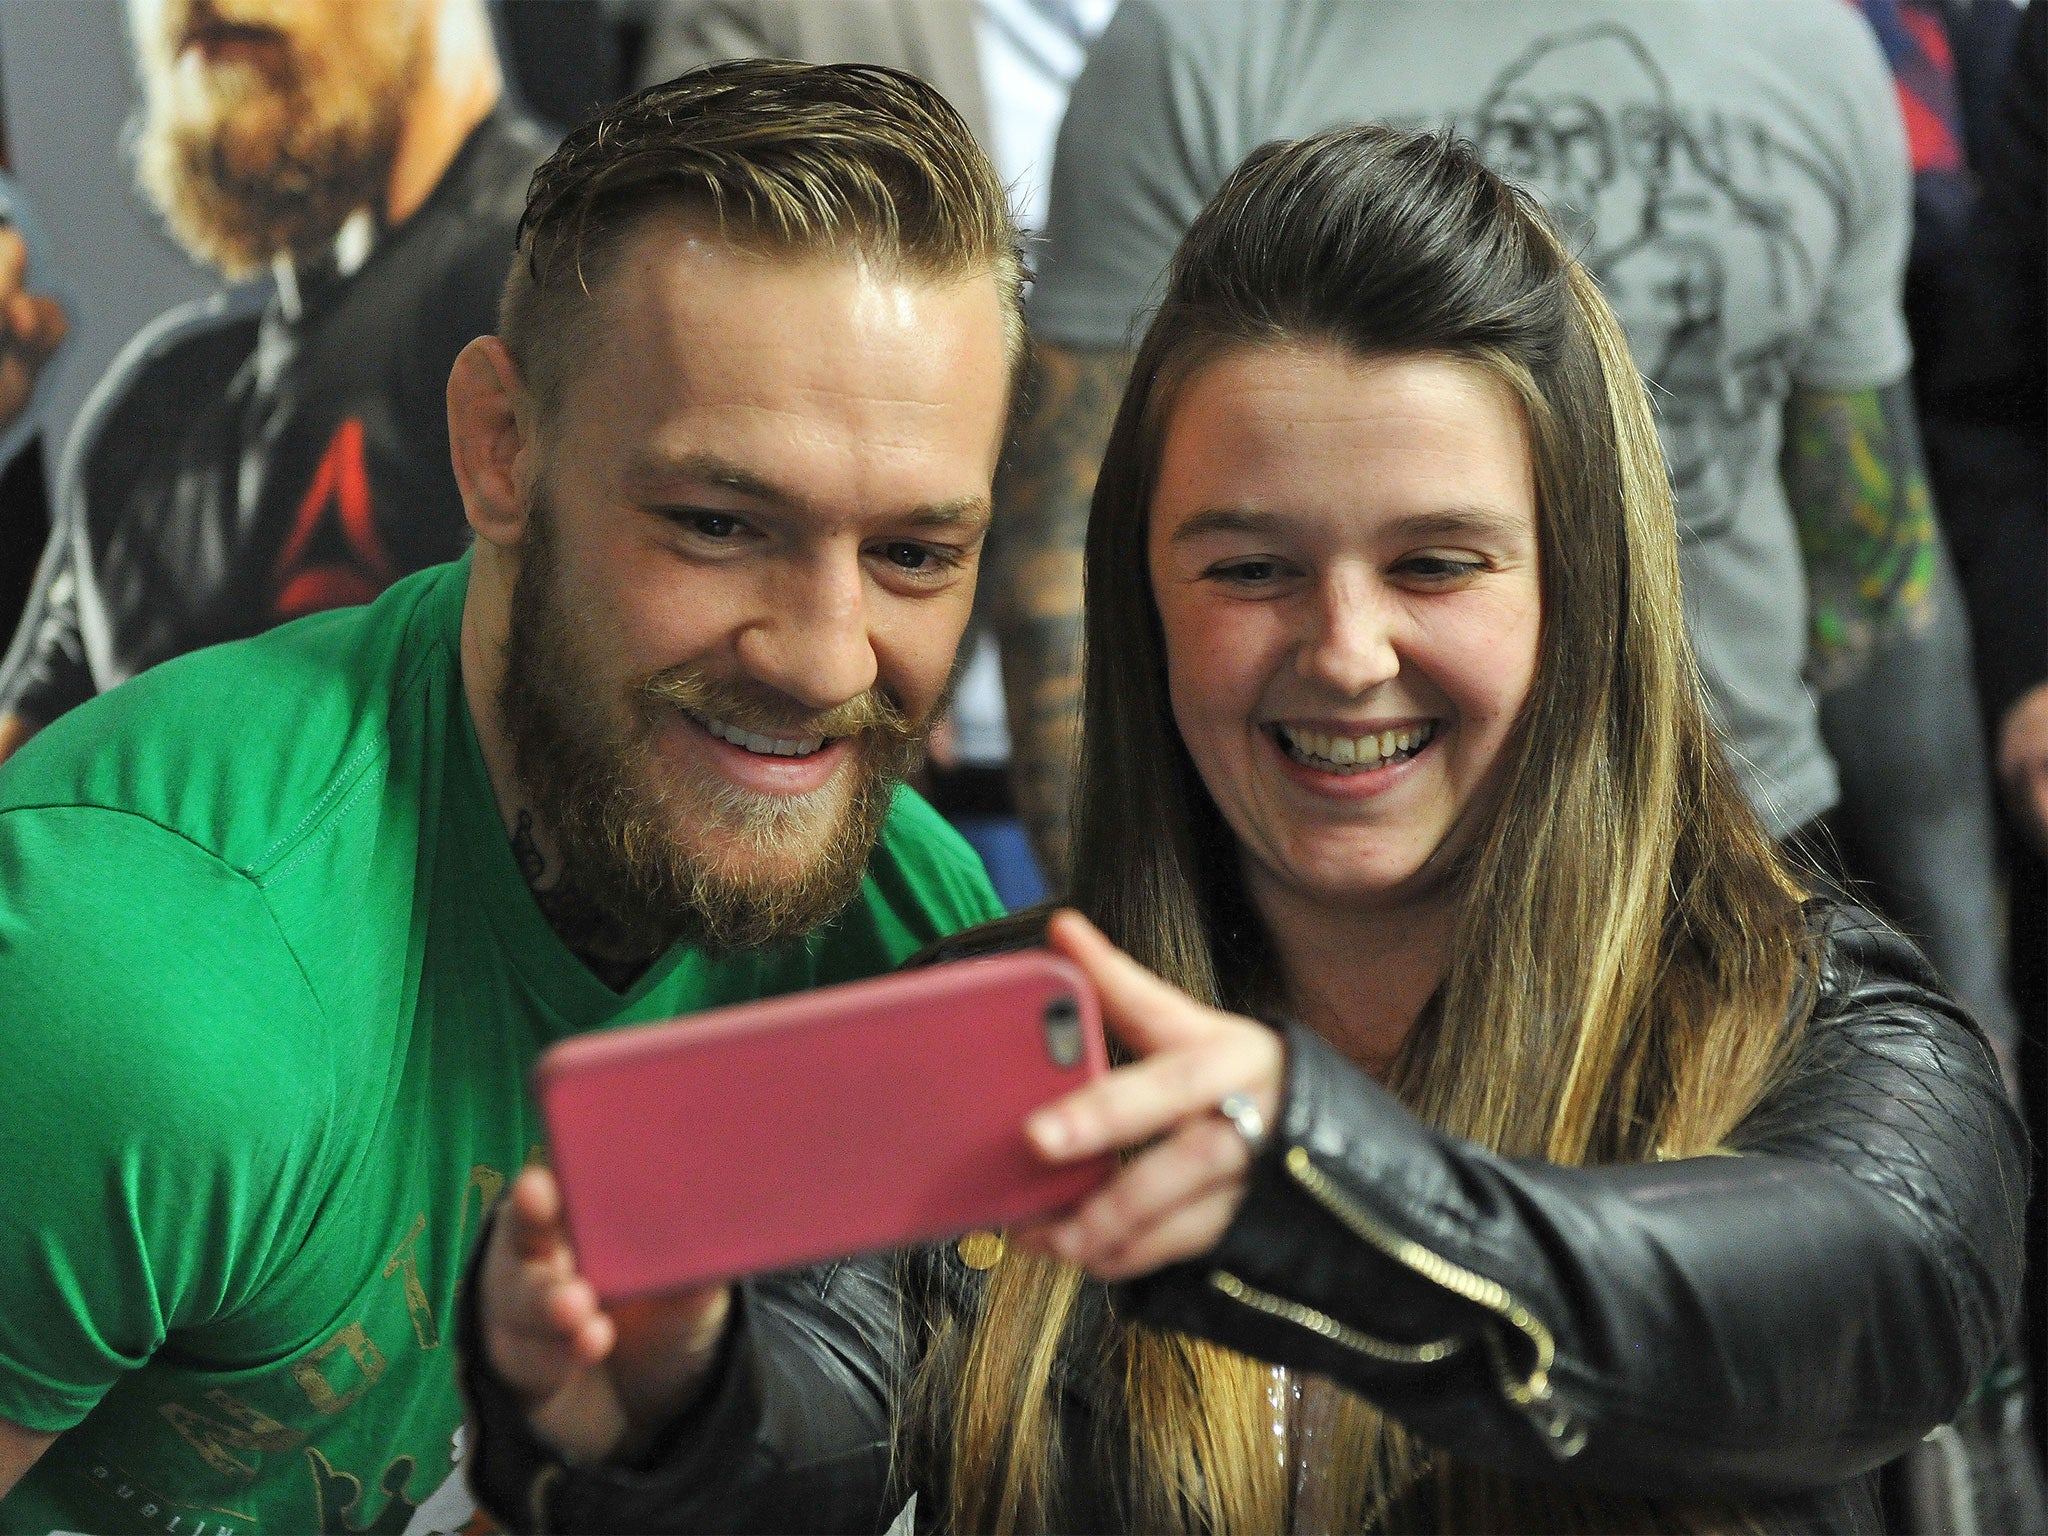 A smiling, very different Conor McGregor poses with fans at JD Sports in Dublin